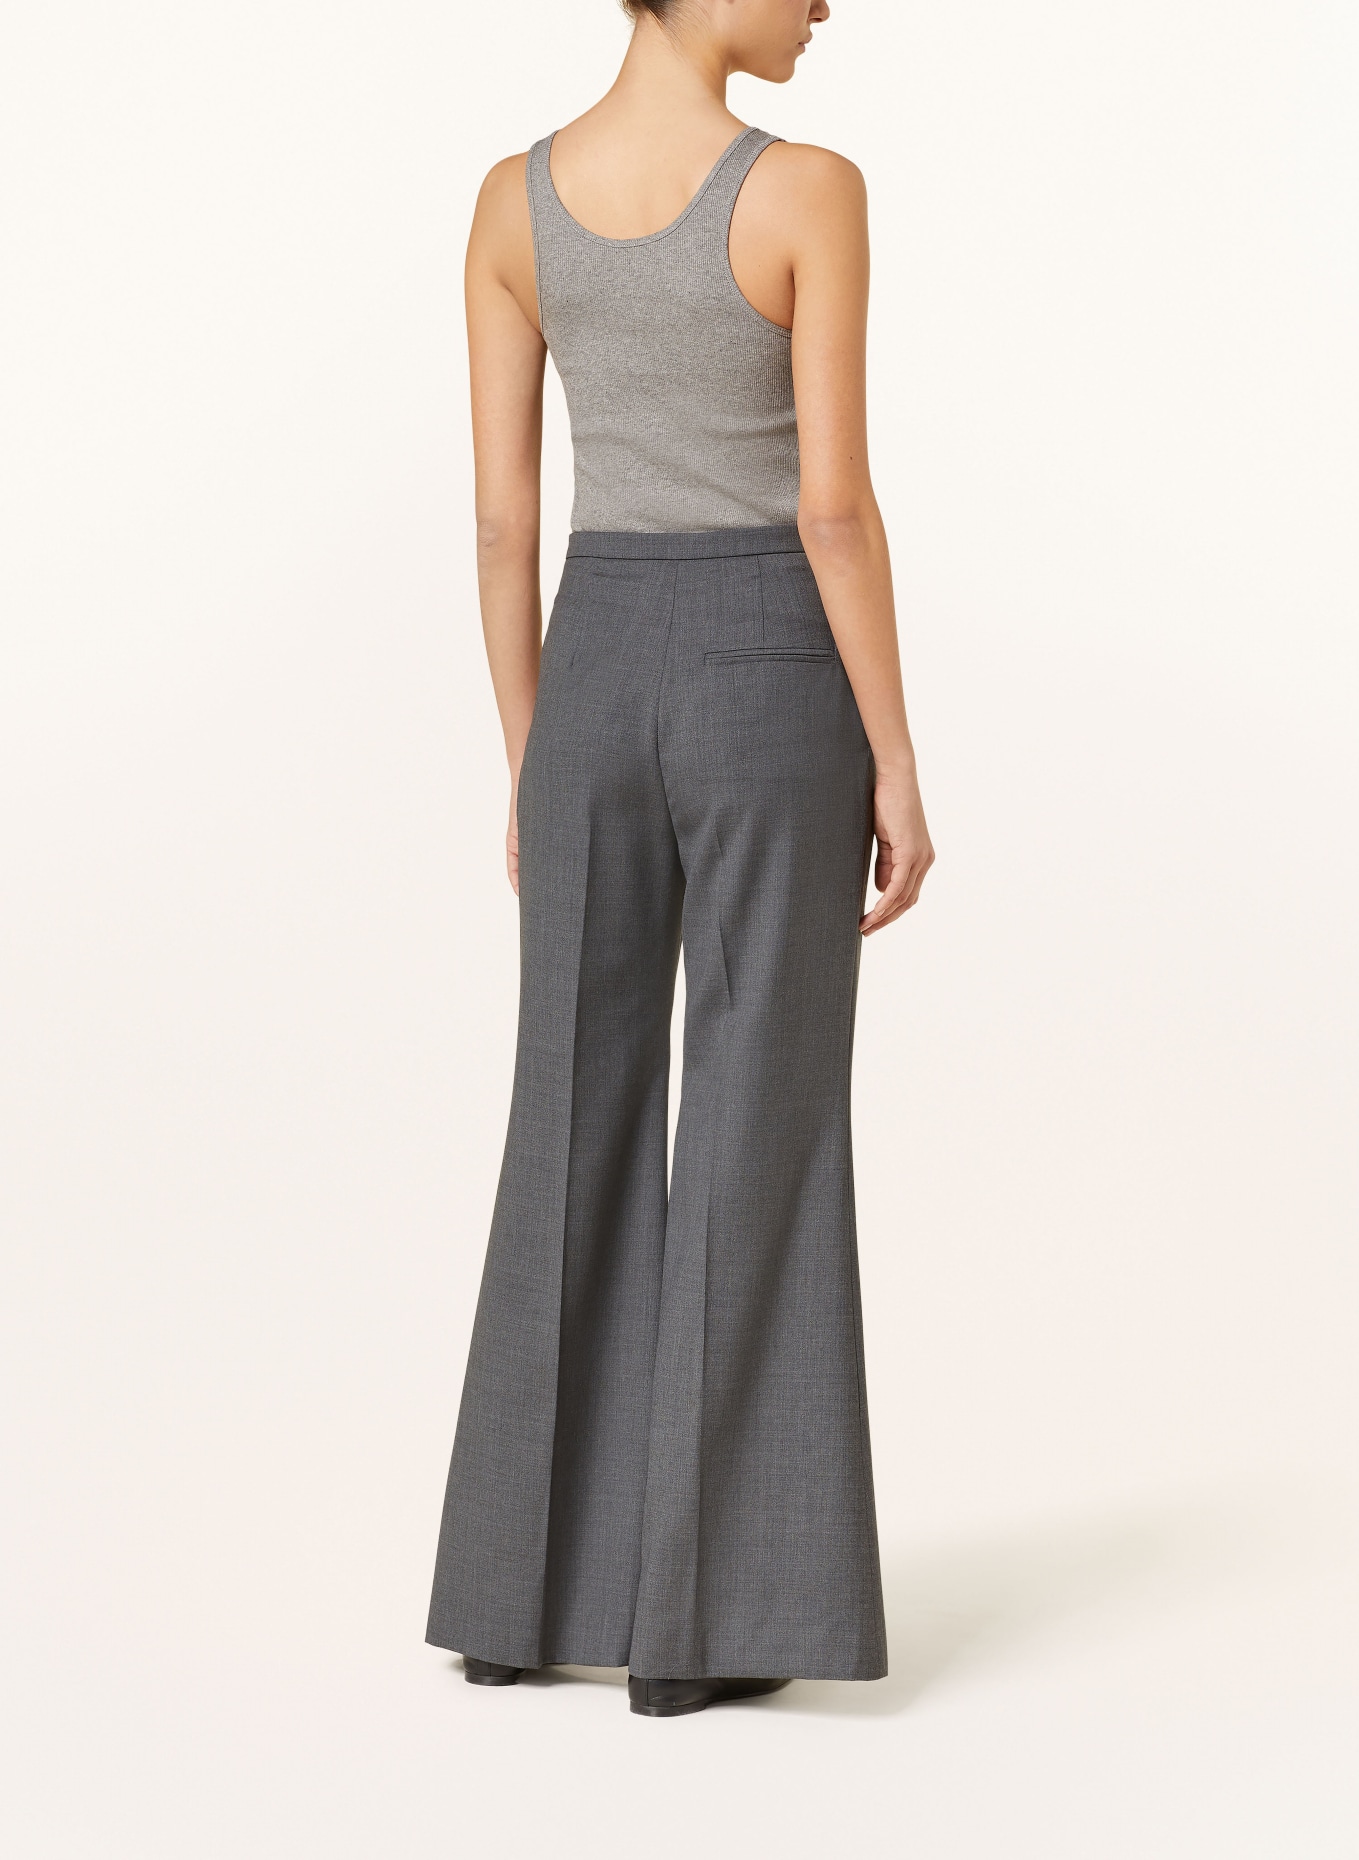 BY MALENE BIRGER Top ANISA, Color: GRAY (Image 3)